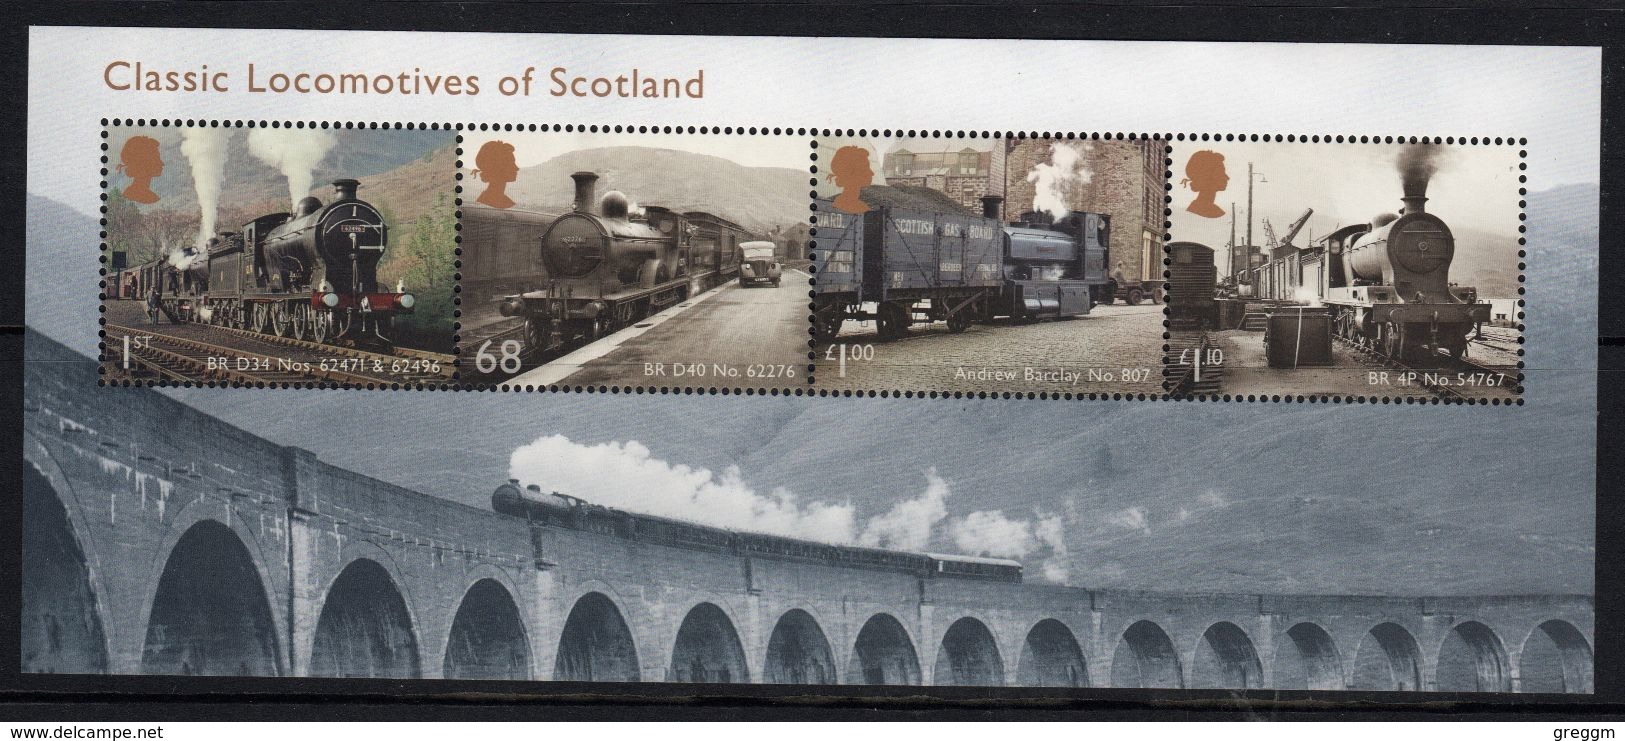 GB 2011 Mini Sheet Celebrating Classic Locomotives 2nd Series In Unmounted Mint Condition. - Blocks & Miniature Sheets